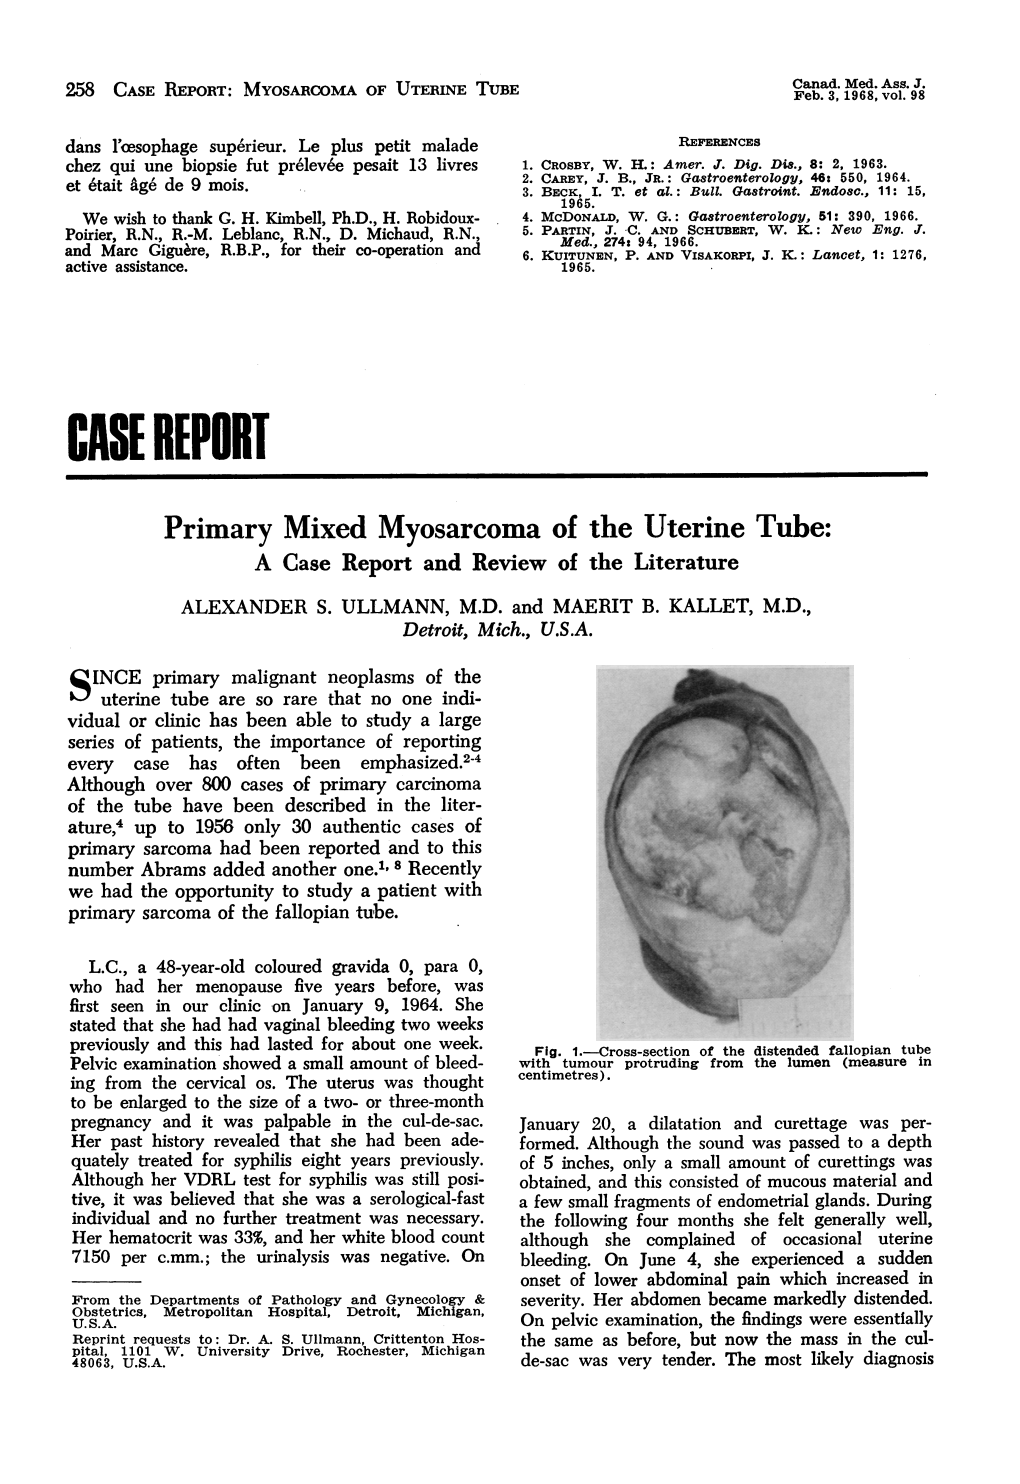 Primary Mixed Myosarcoma of the Uterine Tube: a Case Report and Review of the Literature ALEXANDER S